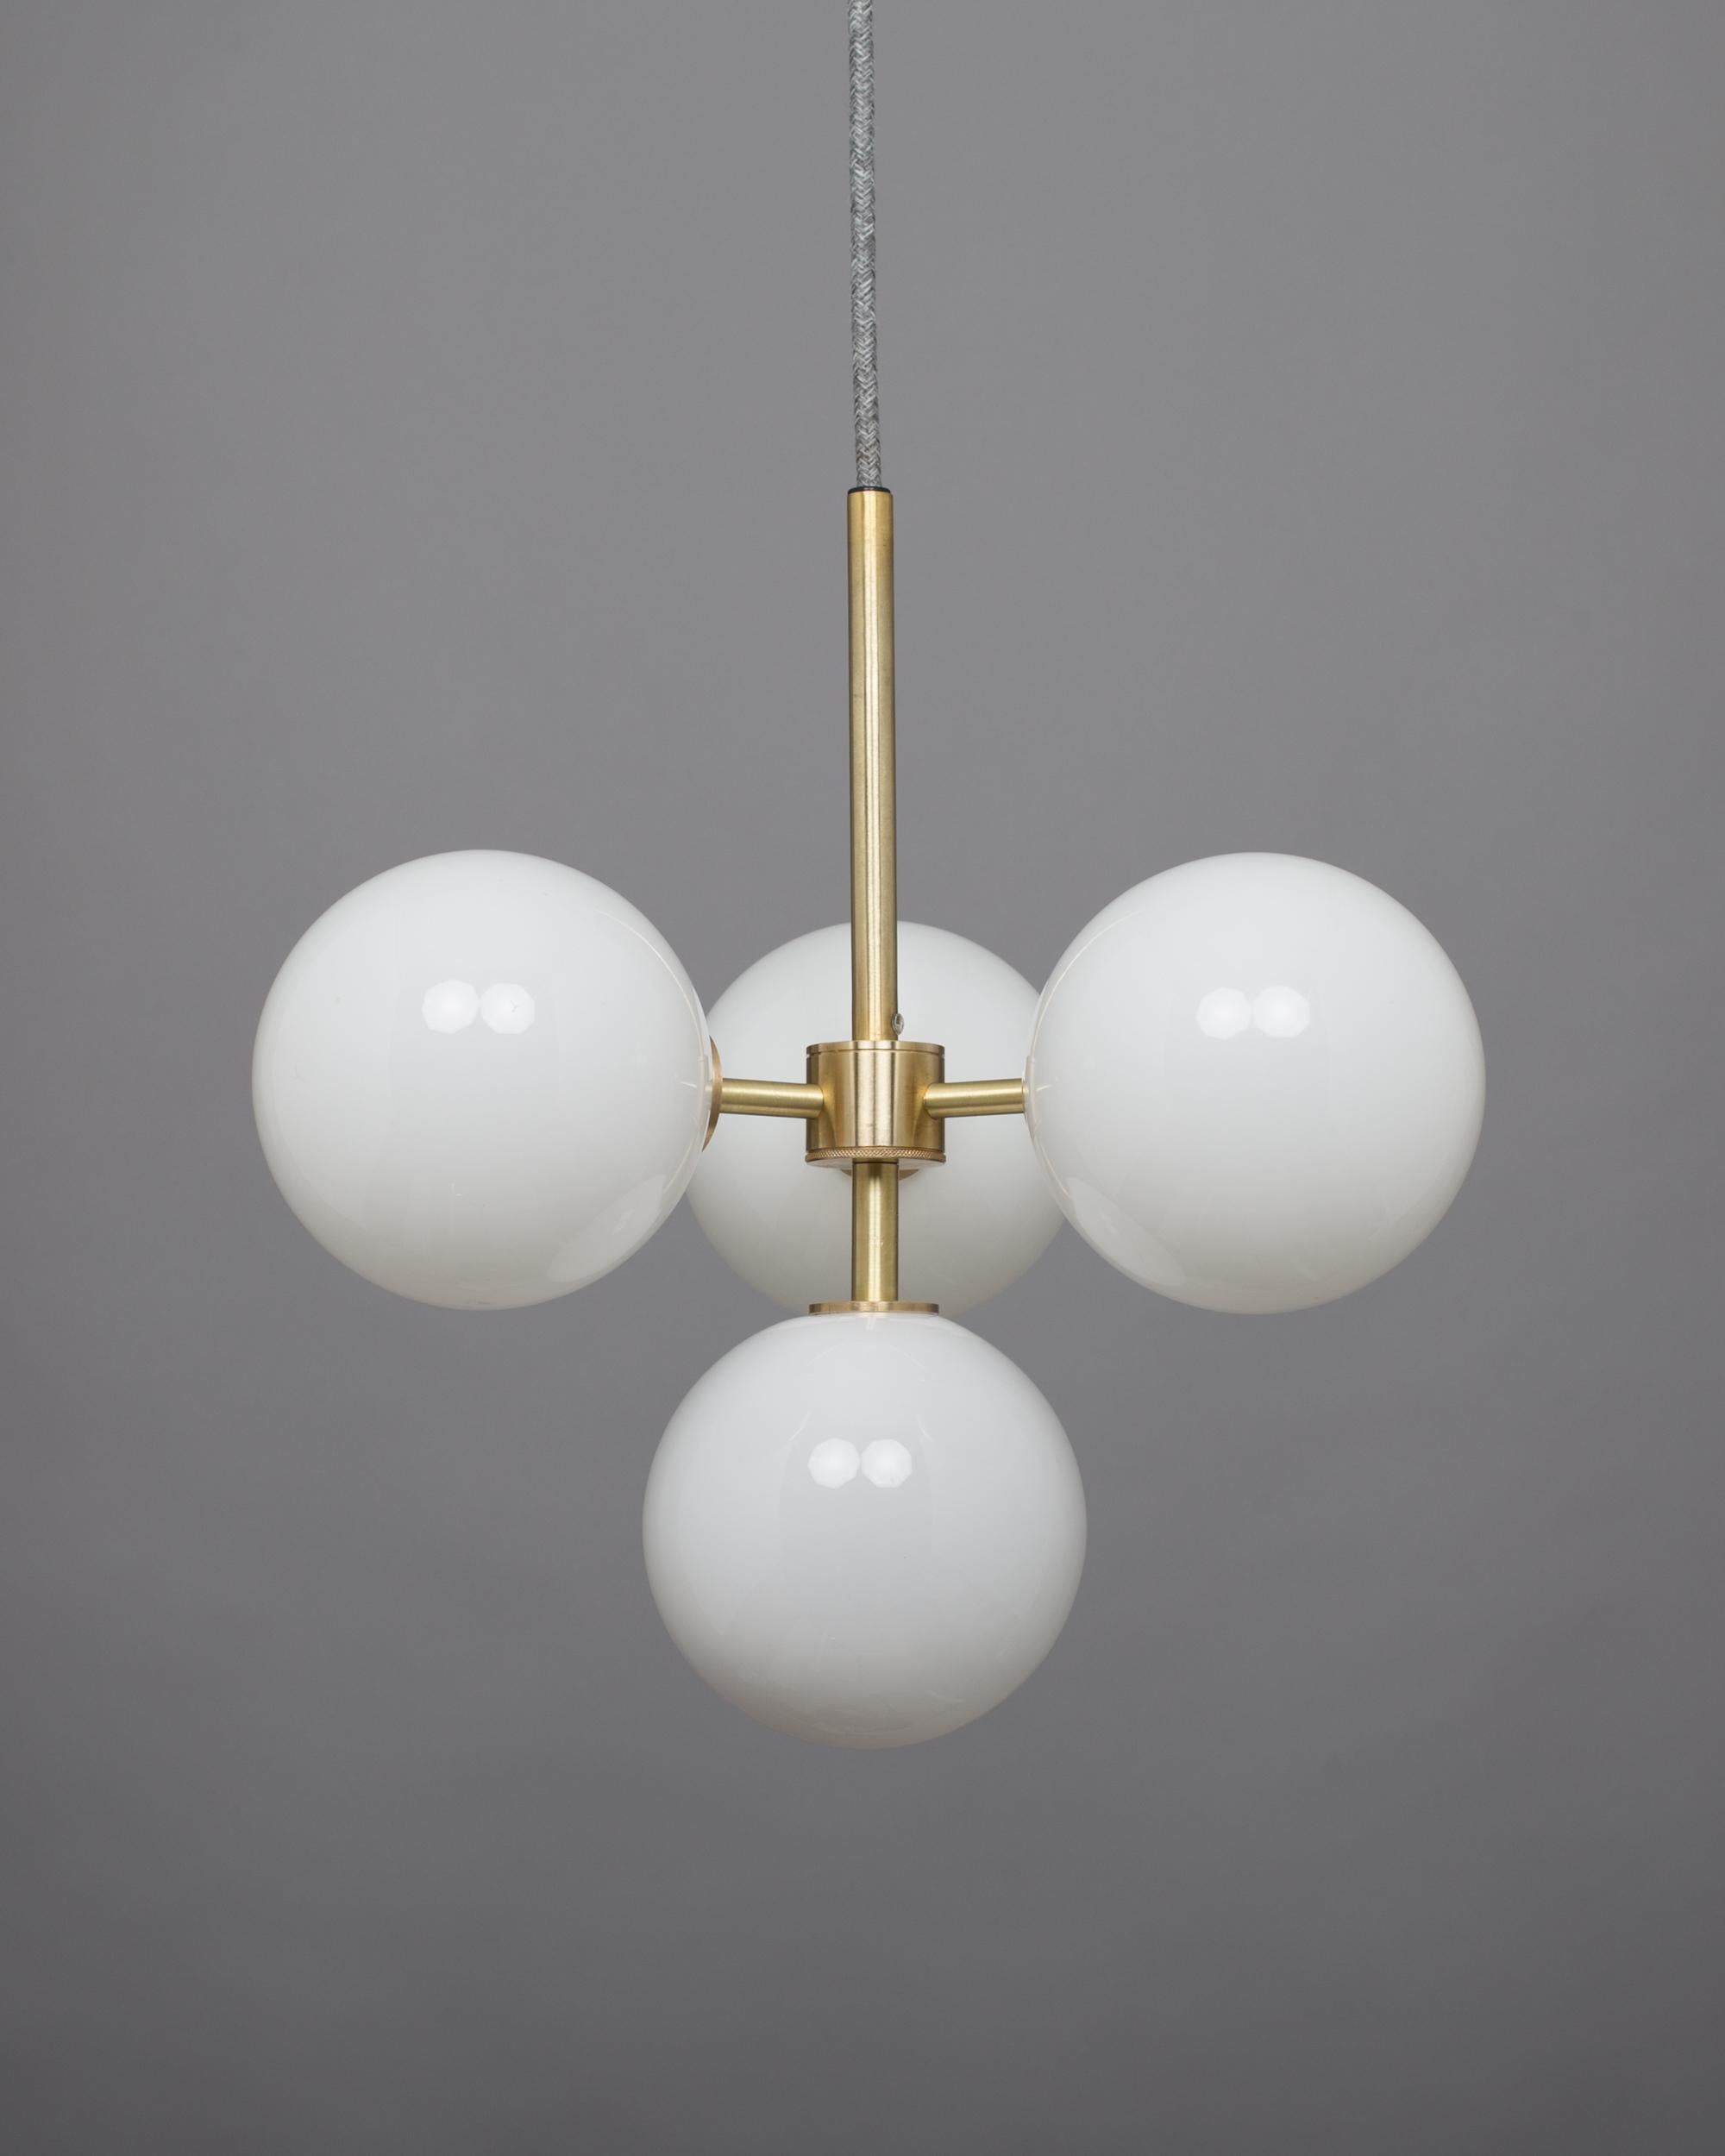 Lights of London design and hand produce contemporary lighting fixtures in the UK and ship worldwide.

Each fixture is individually handcrafted with great attention to detail using the highest quality materials and artisan manufacturing processes